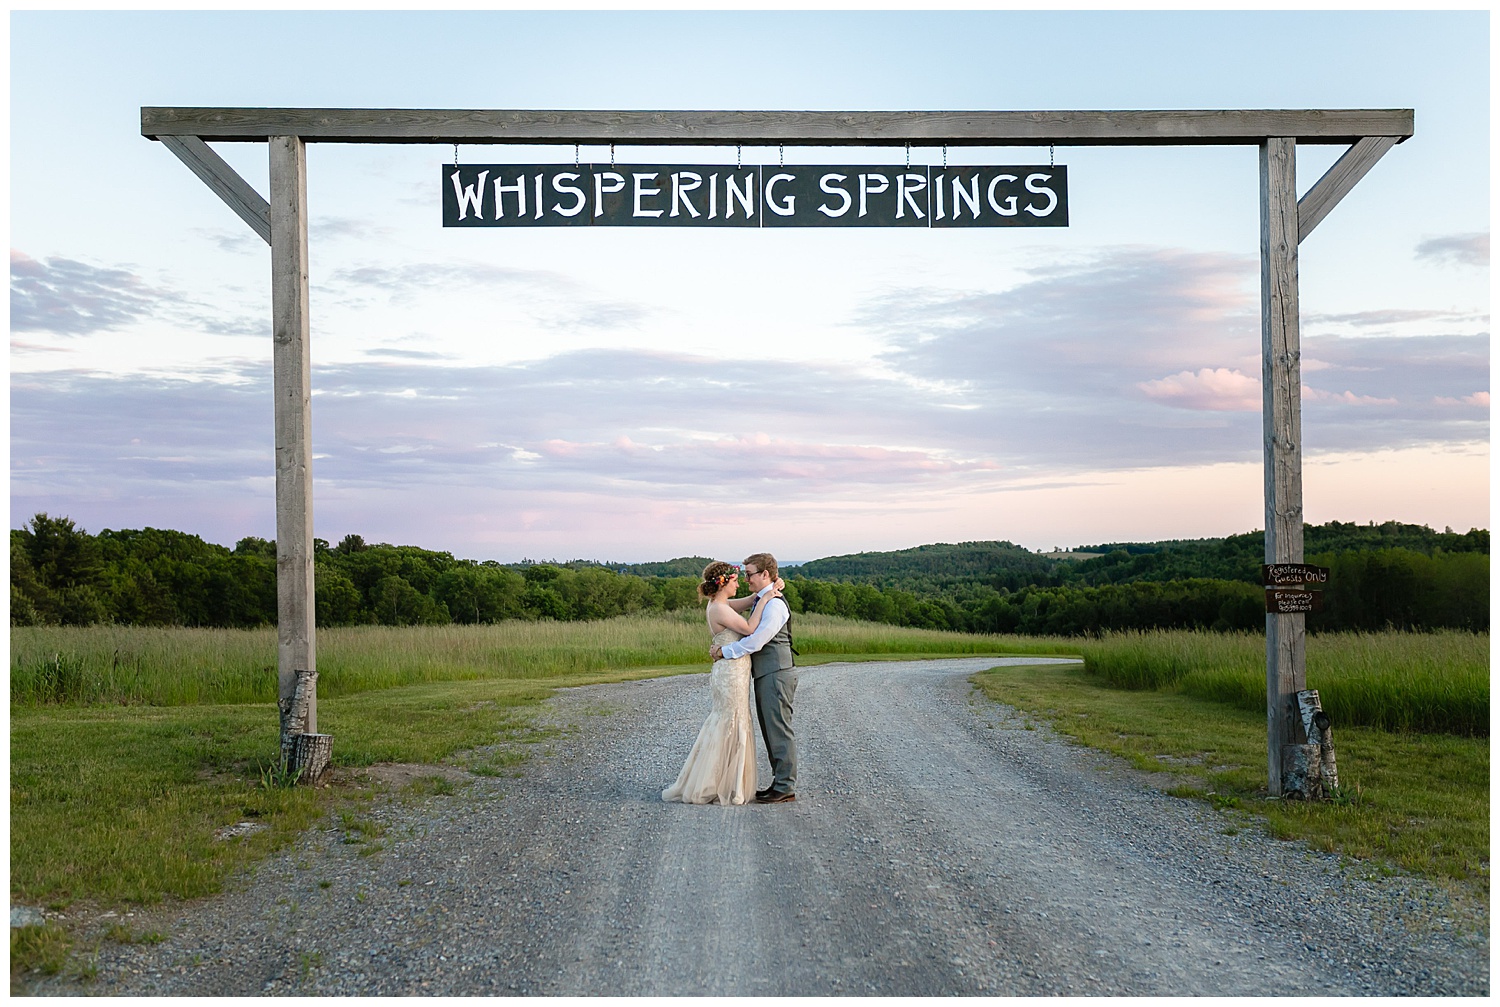 couple under the whispering springs sign